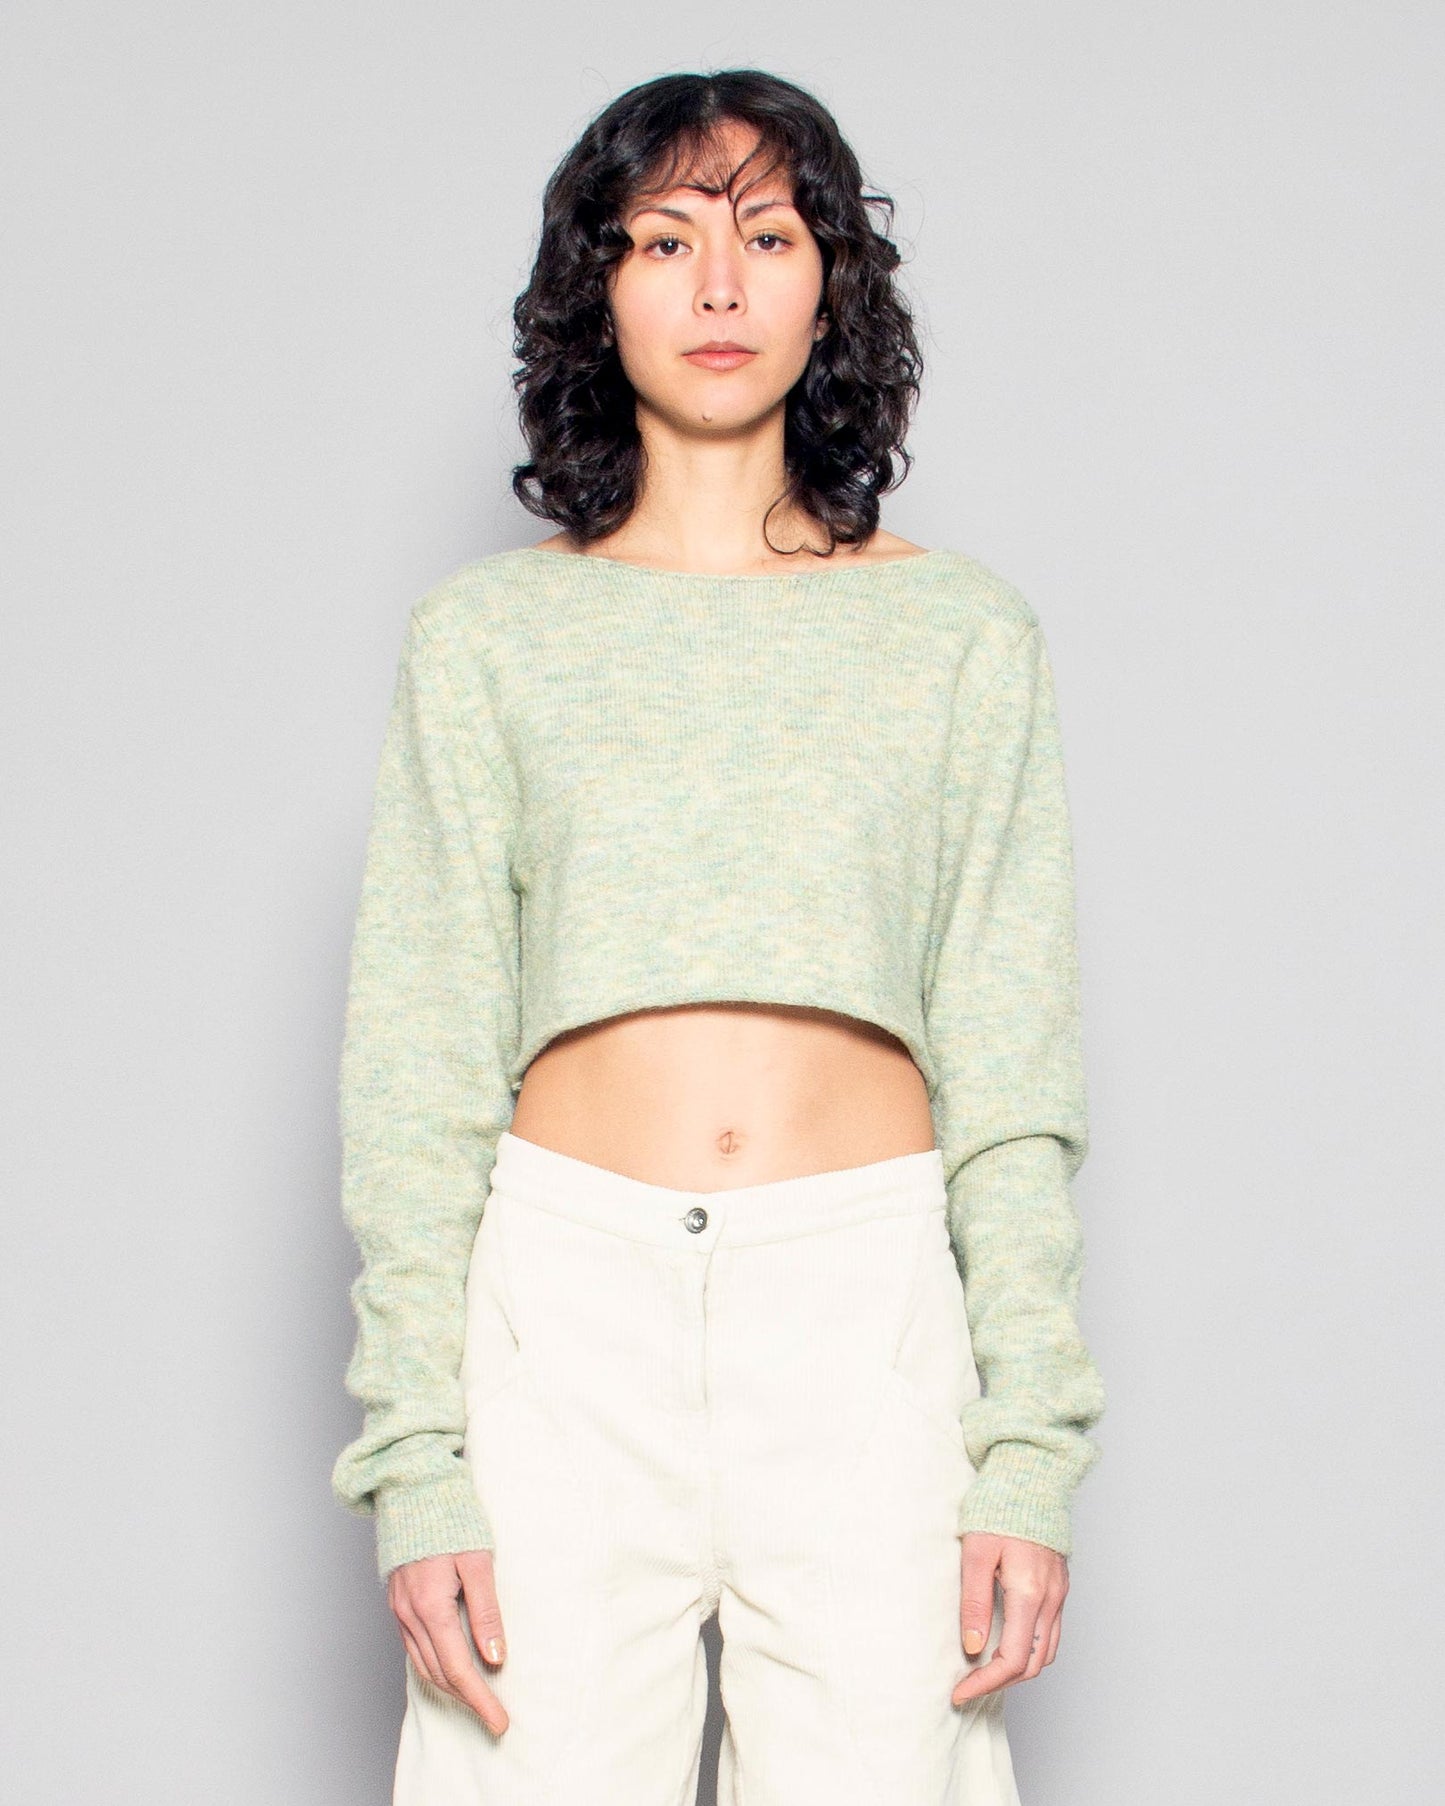 PERSONS Aria Cropped Sweater in Matcha available at Lahn.shop